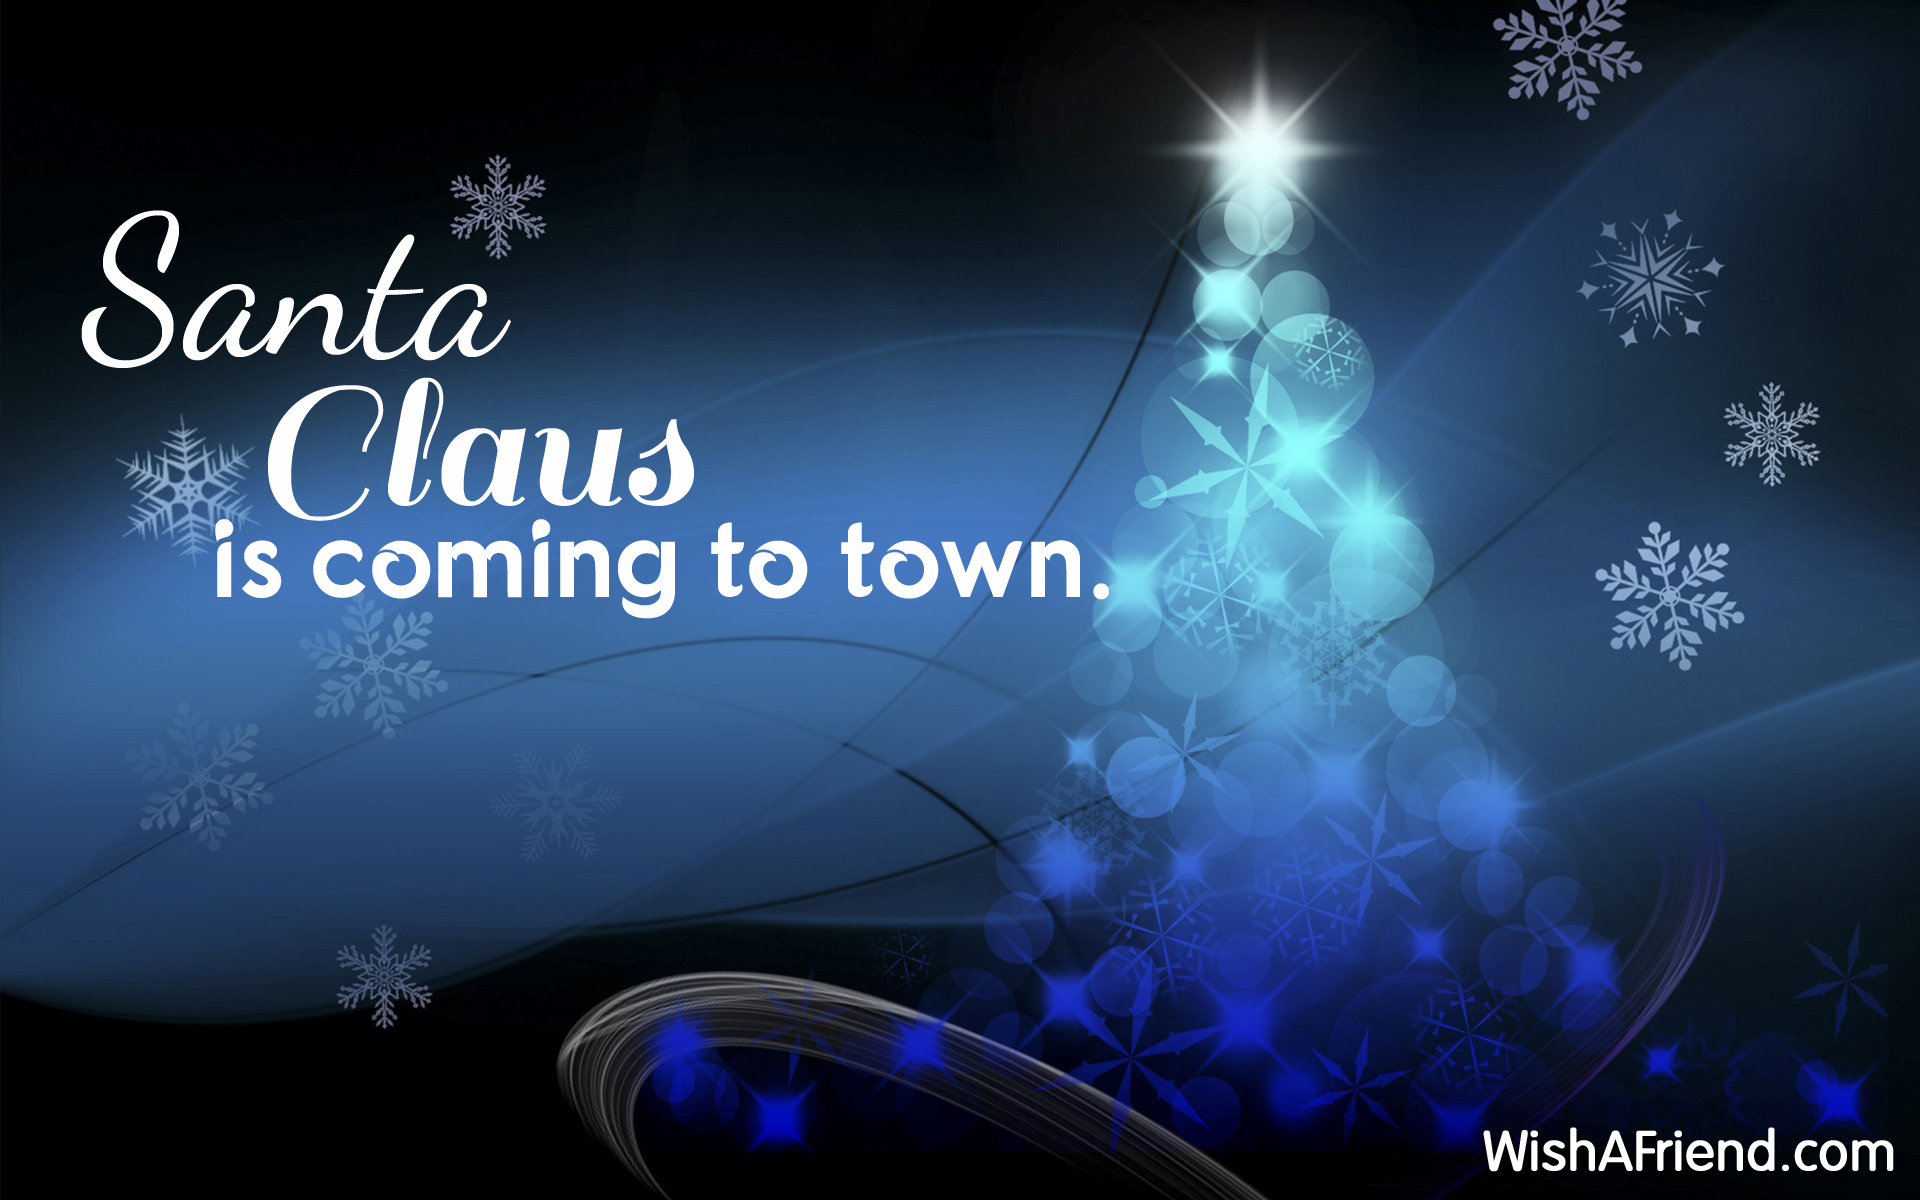 Santa Clous is coming to